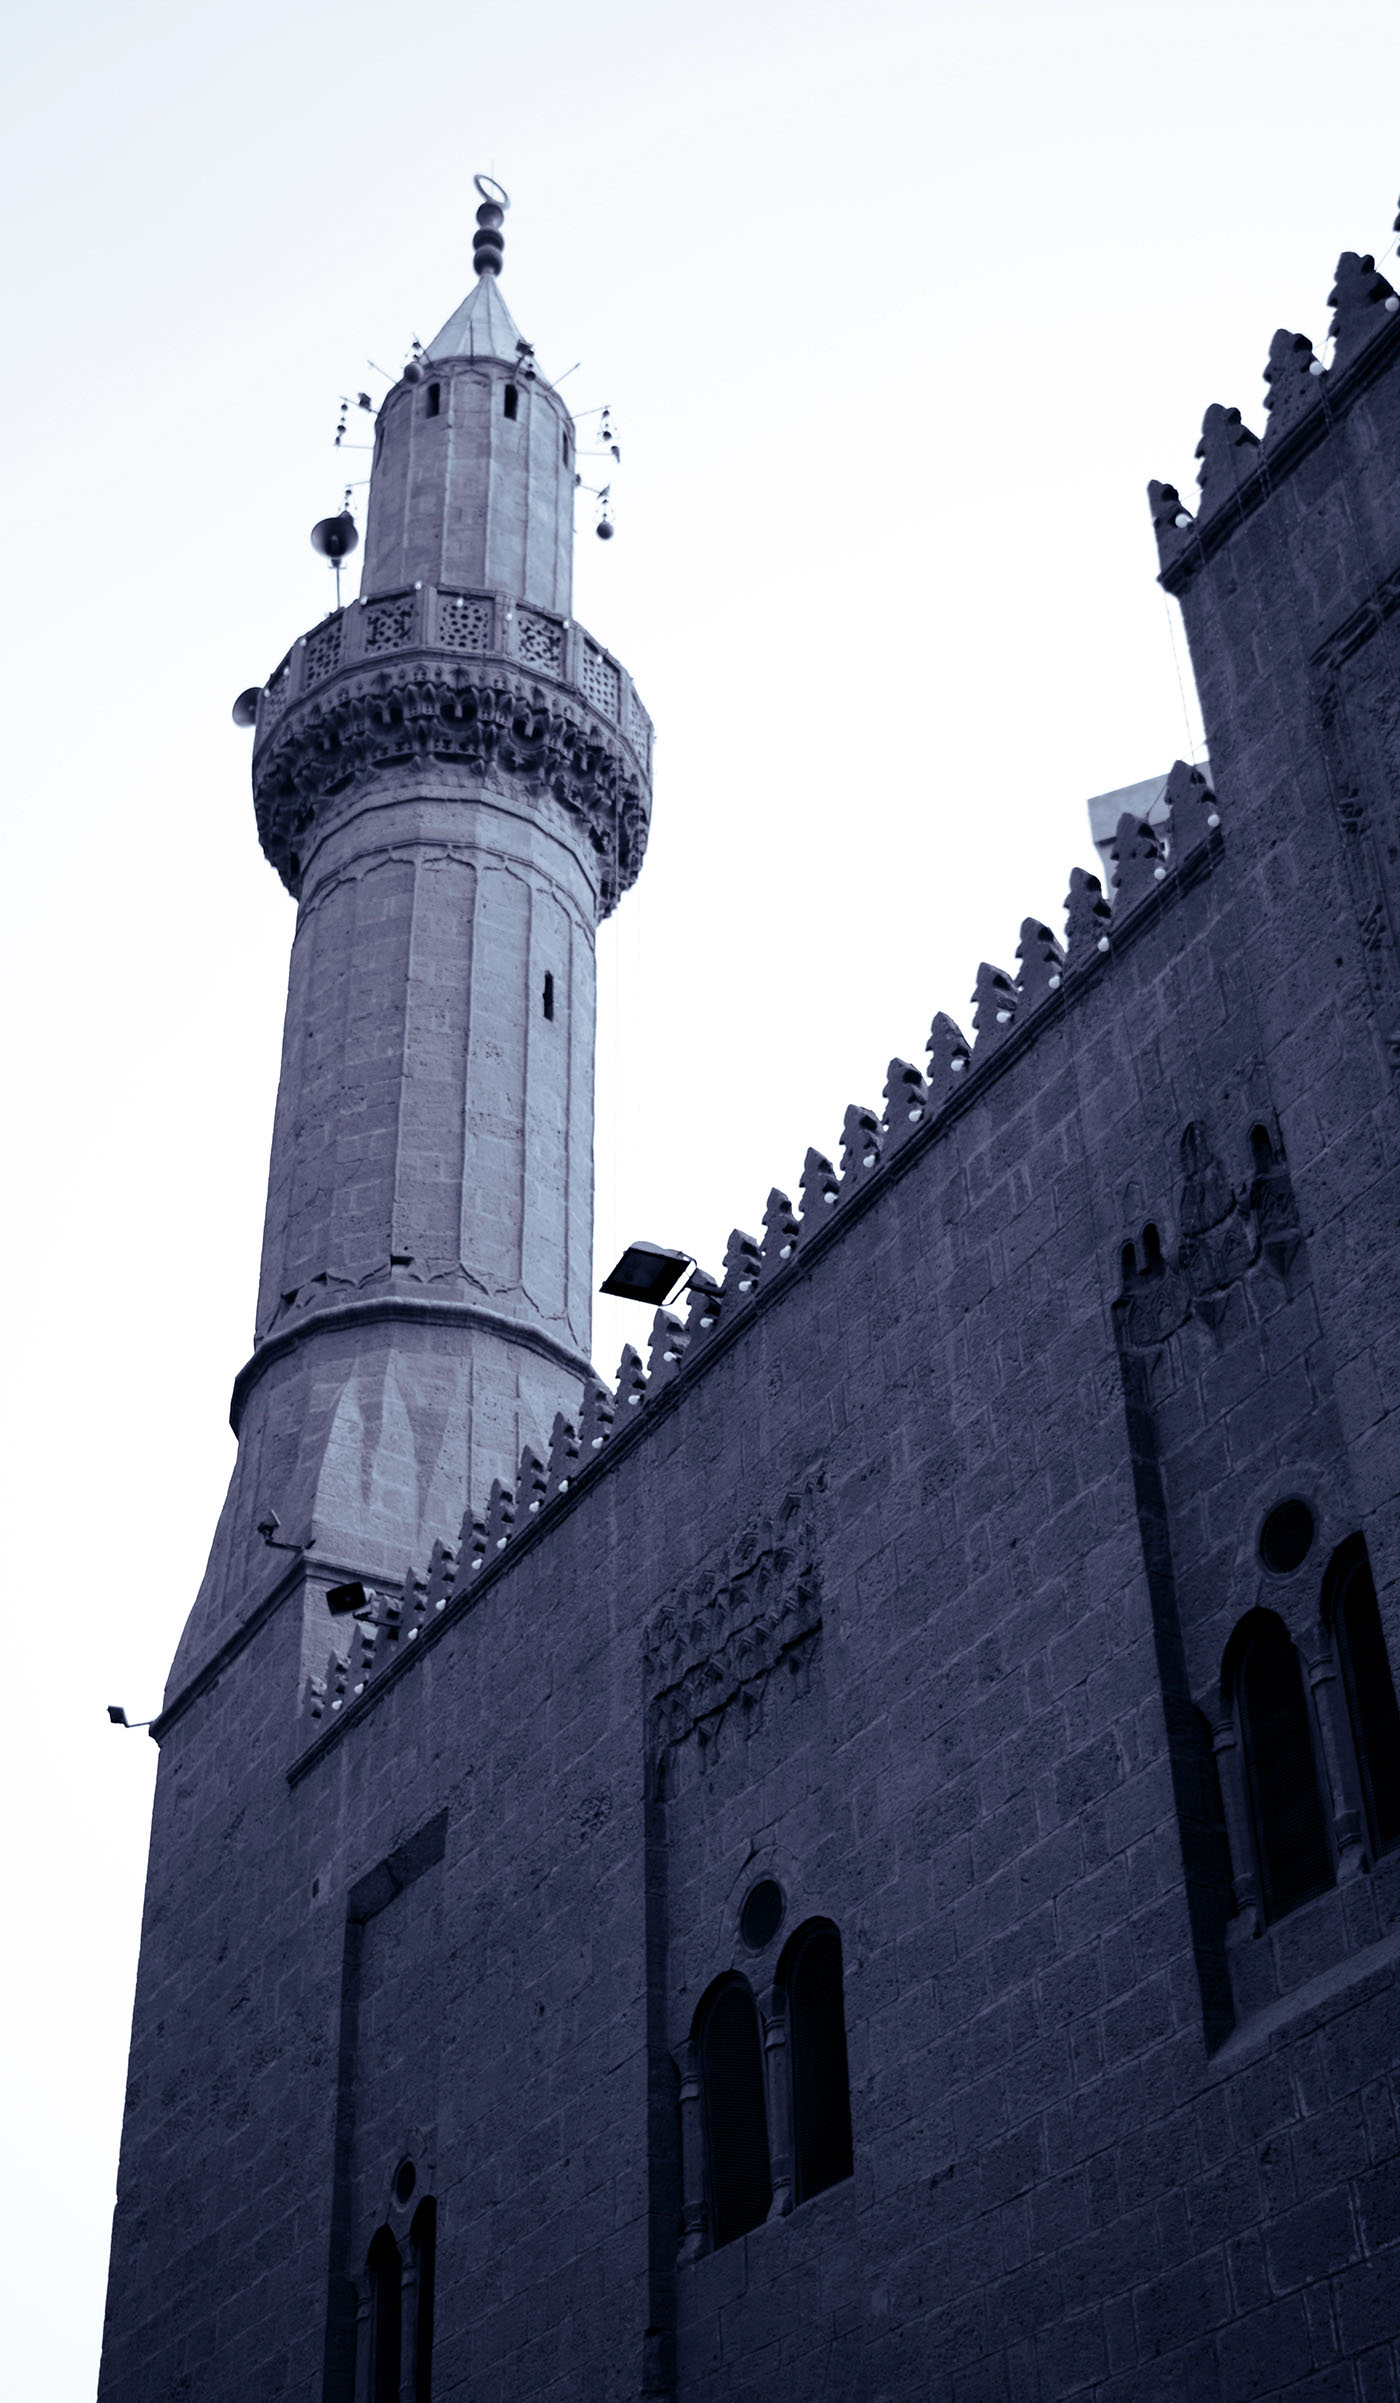 #documenting #photography #cairo  #oldcairo #islamiccairo #Legacy #minarets #finearts